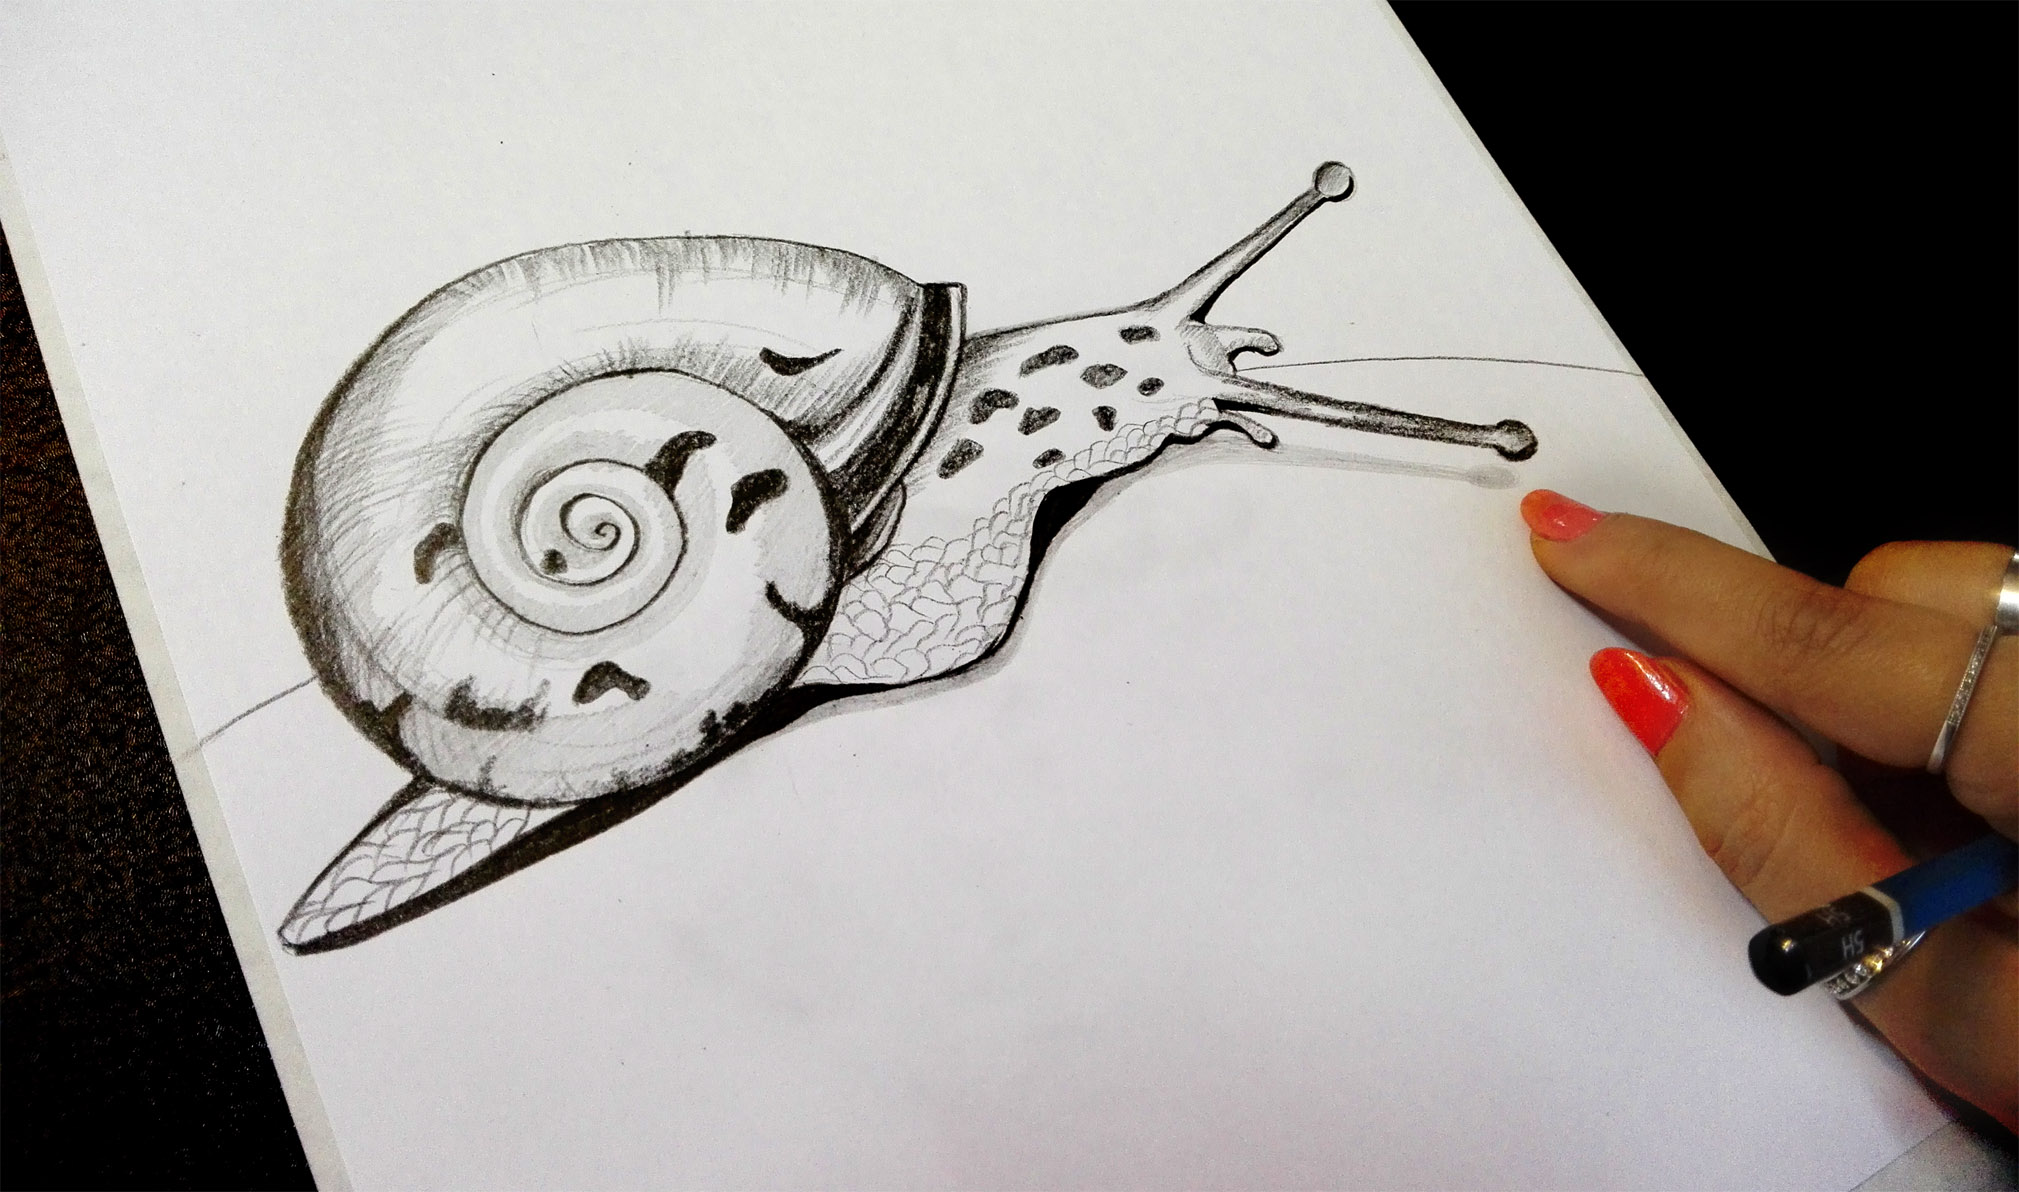 How to Draw a Snail for Kids | Snail Drawing tutorial - YouTube